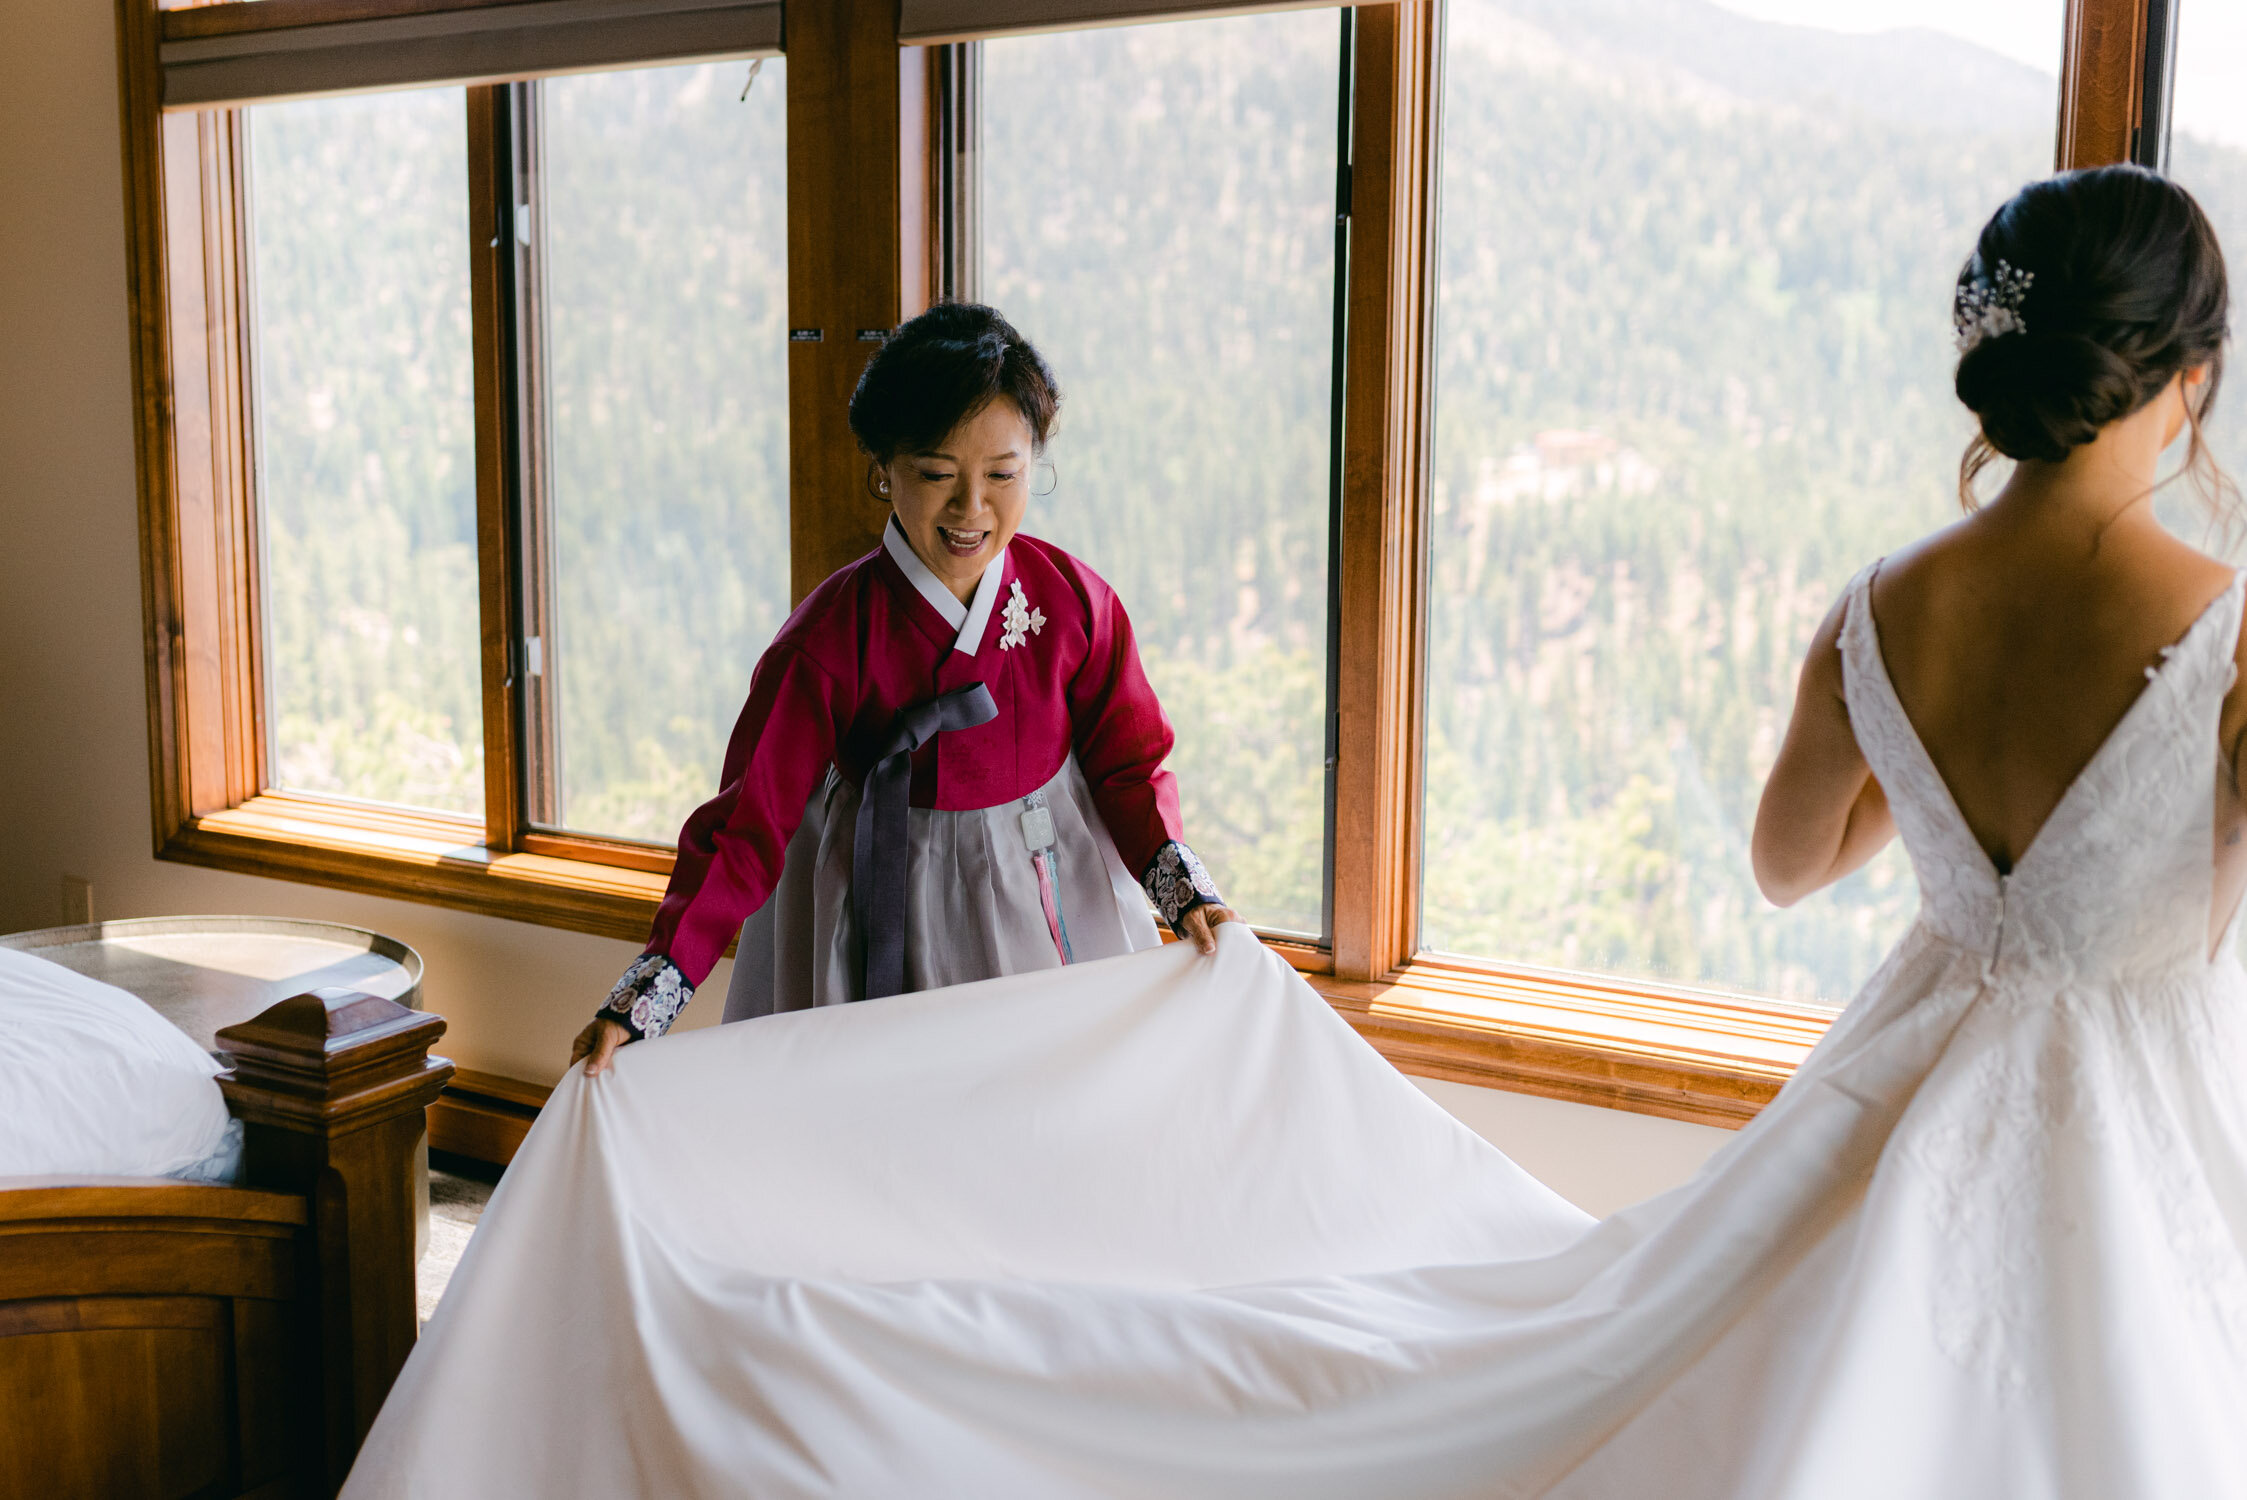 Tahoe Blue Estate Wedding photo of bride helping her daughter with the wedding dress